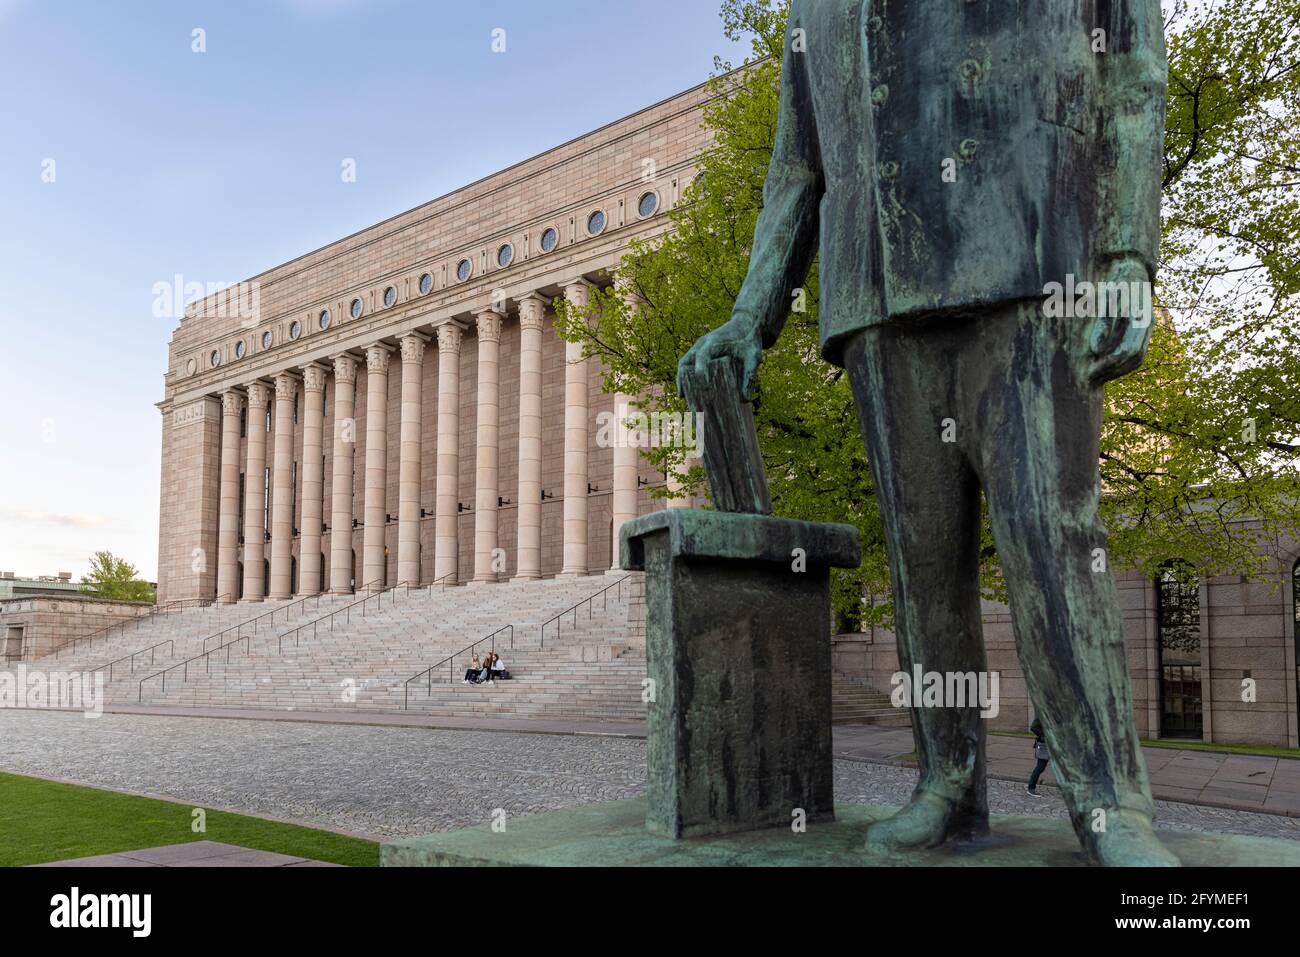 Finnish parliament building is recognisable from granite colonnade facade and statues of former presidents in front. Stock Photo